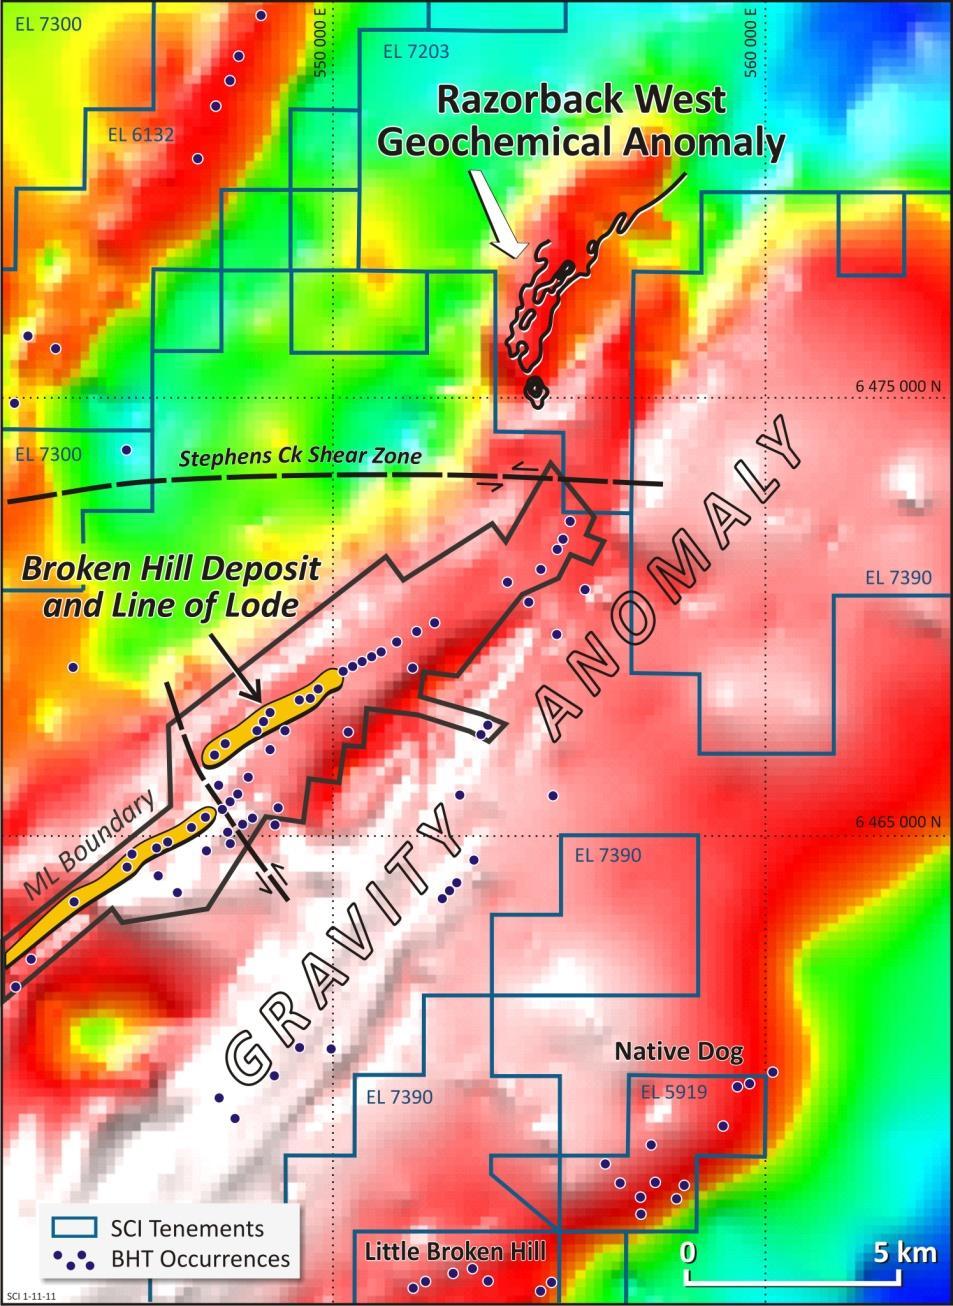 Razorback West Broken Hill dominated by large gravity anomaly Broken Hill deposit located on western edge Little